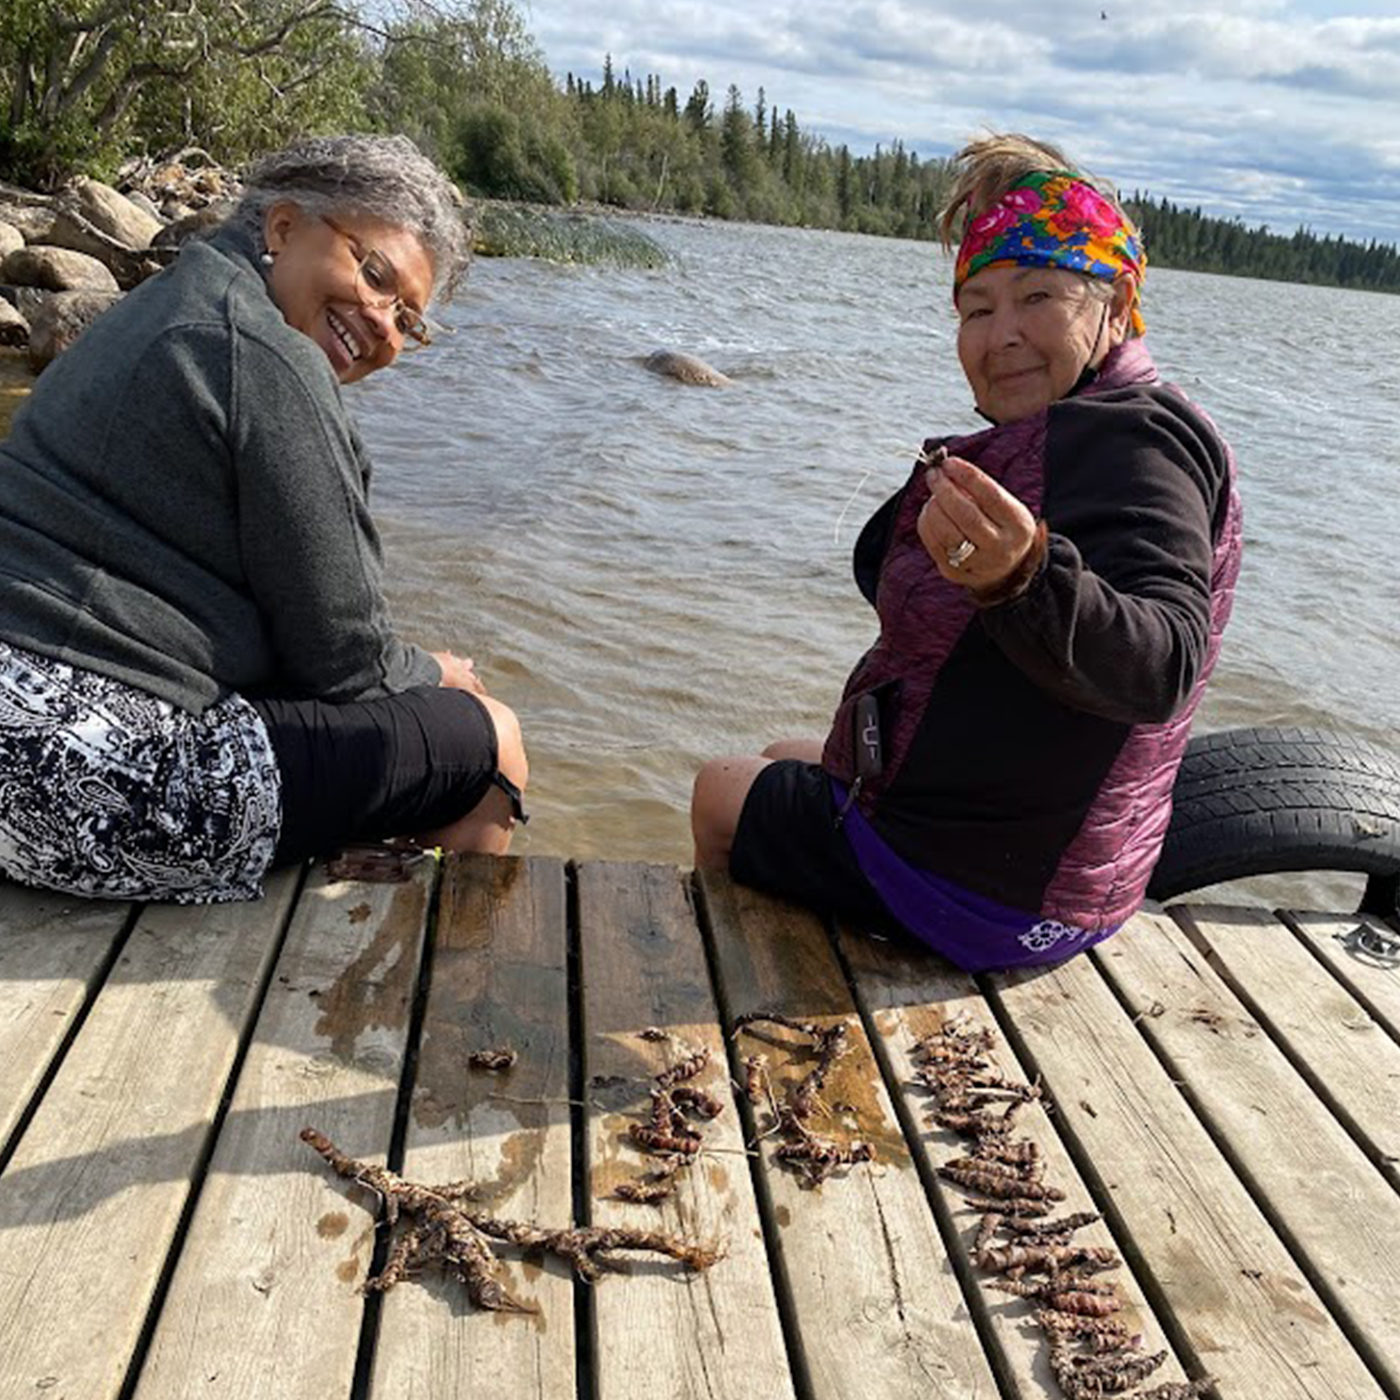 A Black and an Indigenous woman are seated on the edge of a wooden dock, with their legs in the water. They are looking over their shoulders towards the camera and smiling, with water and trees behind them. On the right, the Indigenous woman is reaching out to show the camera a piece of a root. On the dock next to them are more pieces of washed roots.